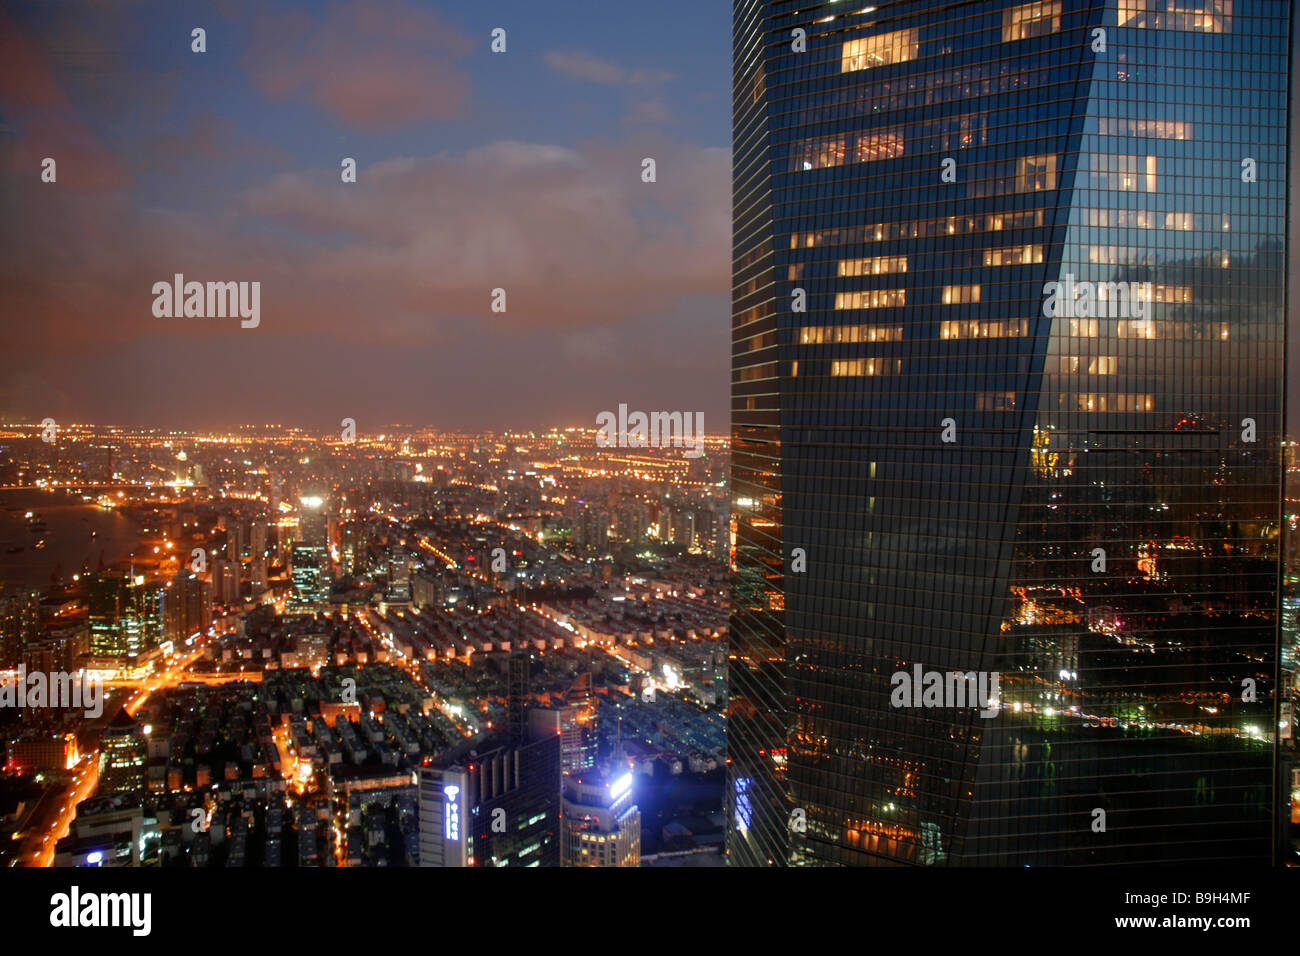 China, Shanghai. View from the Jin Mao Tower of the World Financial Center. Stock Photo